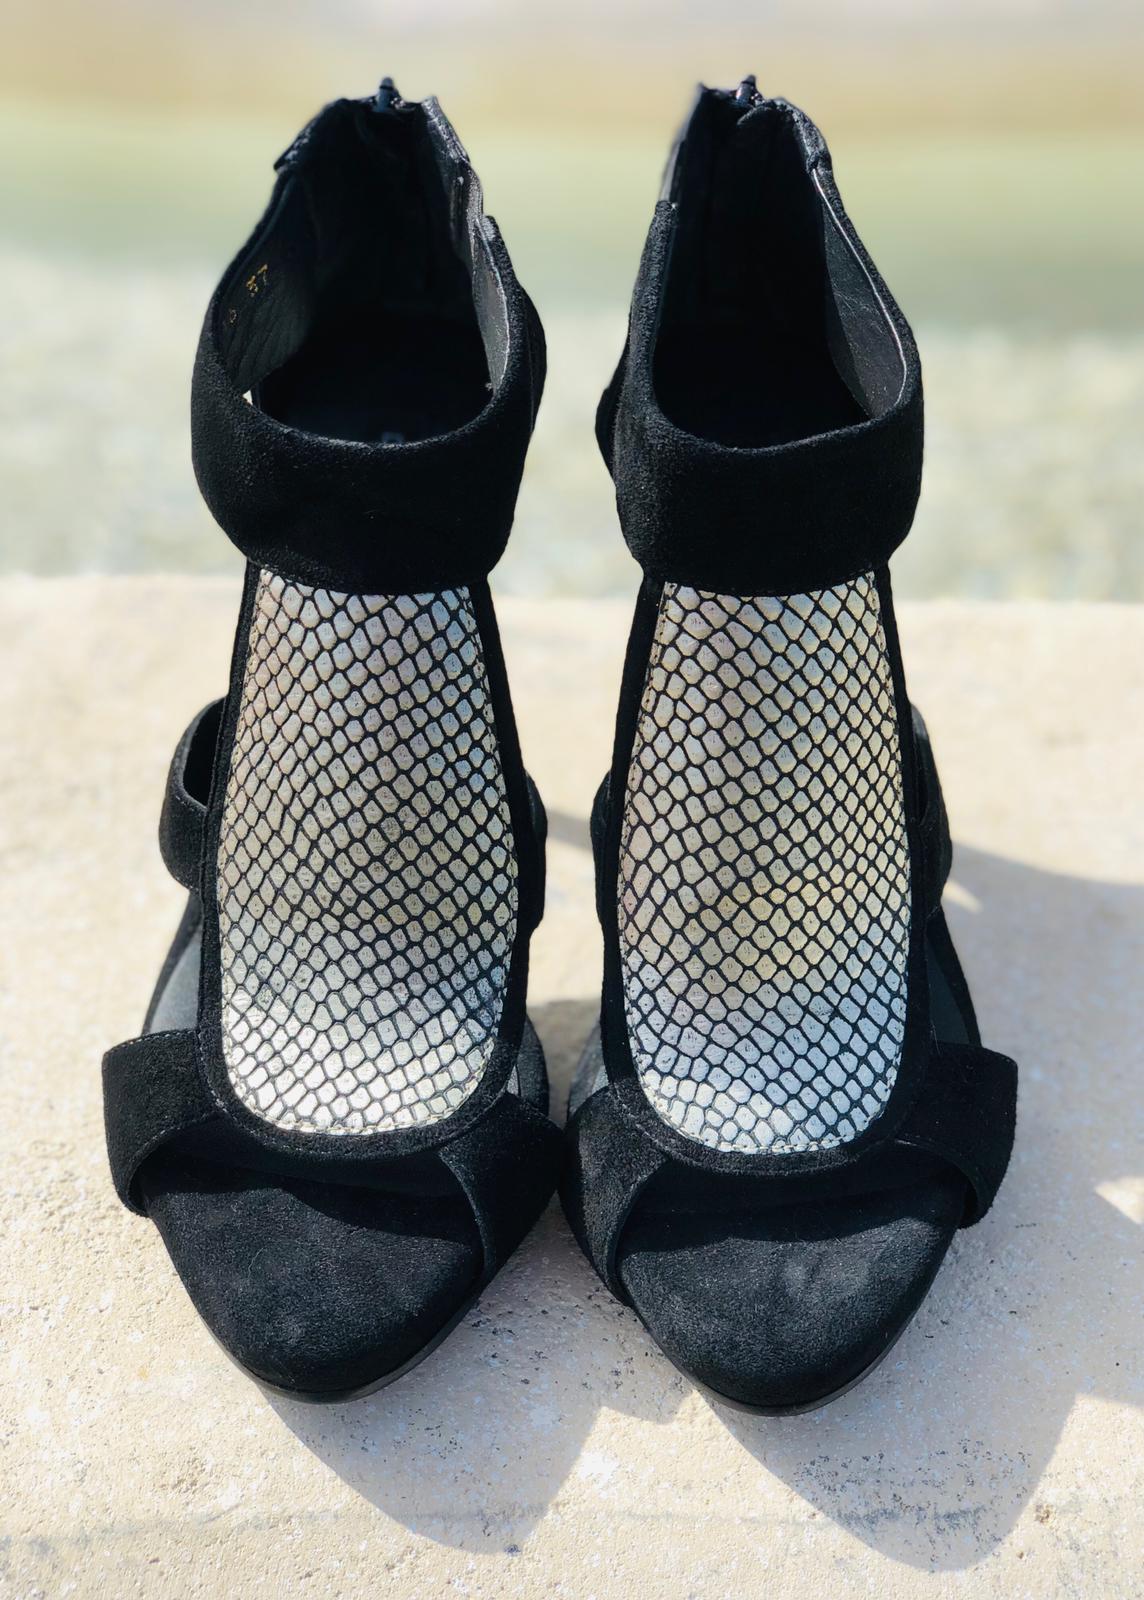 Sabi Shoes in Black with Silver leather detail